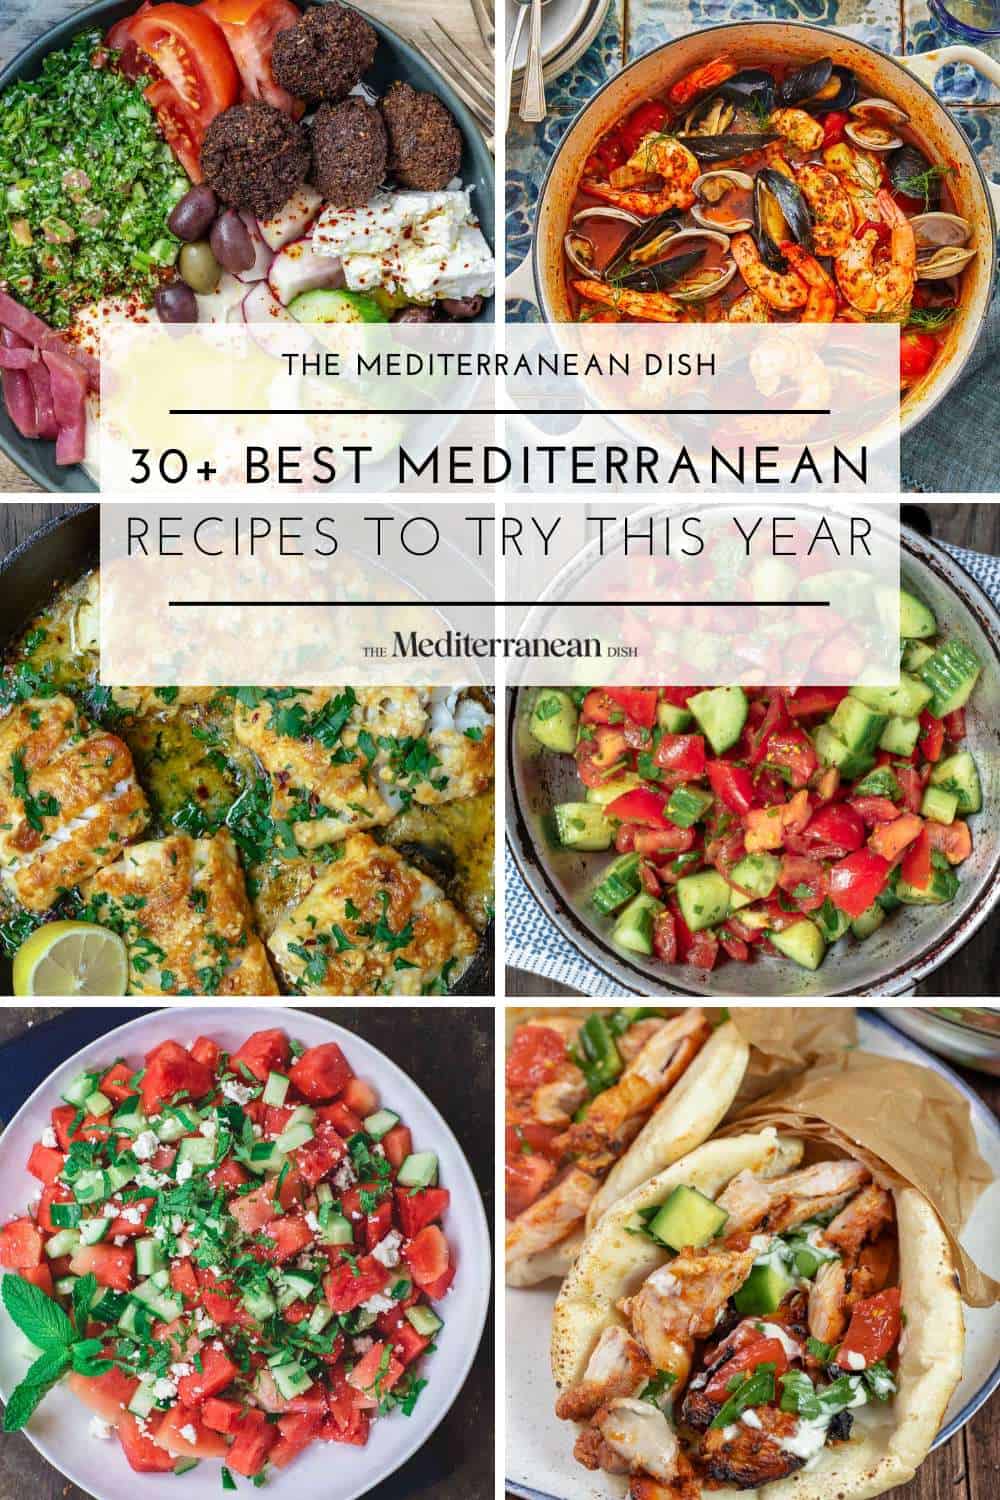 What Sweets Can You Eat On Mediterranean Diet?